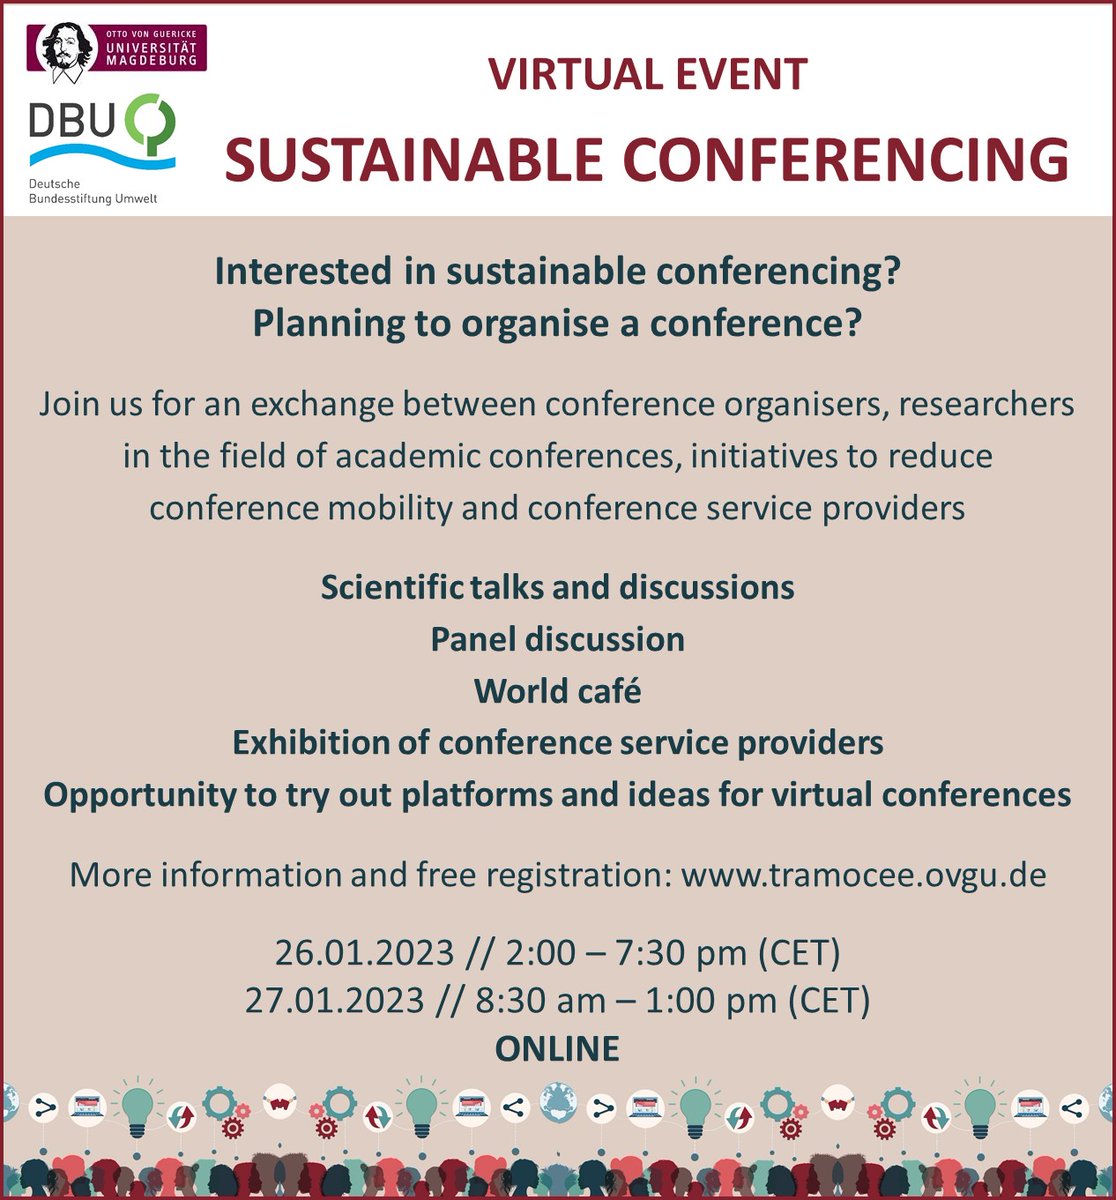 Interested in sustainable conferencing?
Planning to organise a conference?

Join our virtual event on Sustainable Conference Design of the Future organised by @OvGU_UmweltPsy supported by @umweltstiftung.

tramocee.ovgu.de/en

#SustainableConferencing #VirtualConferences